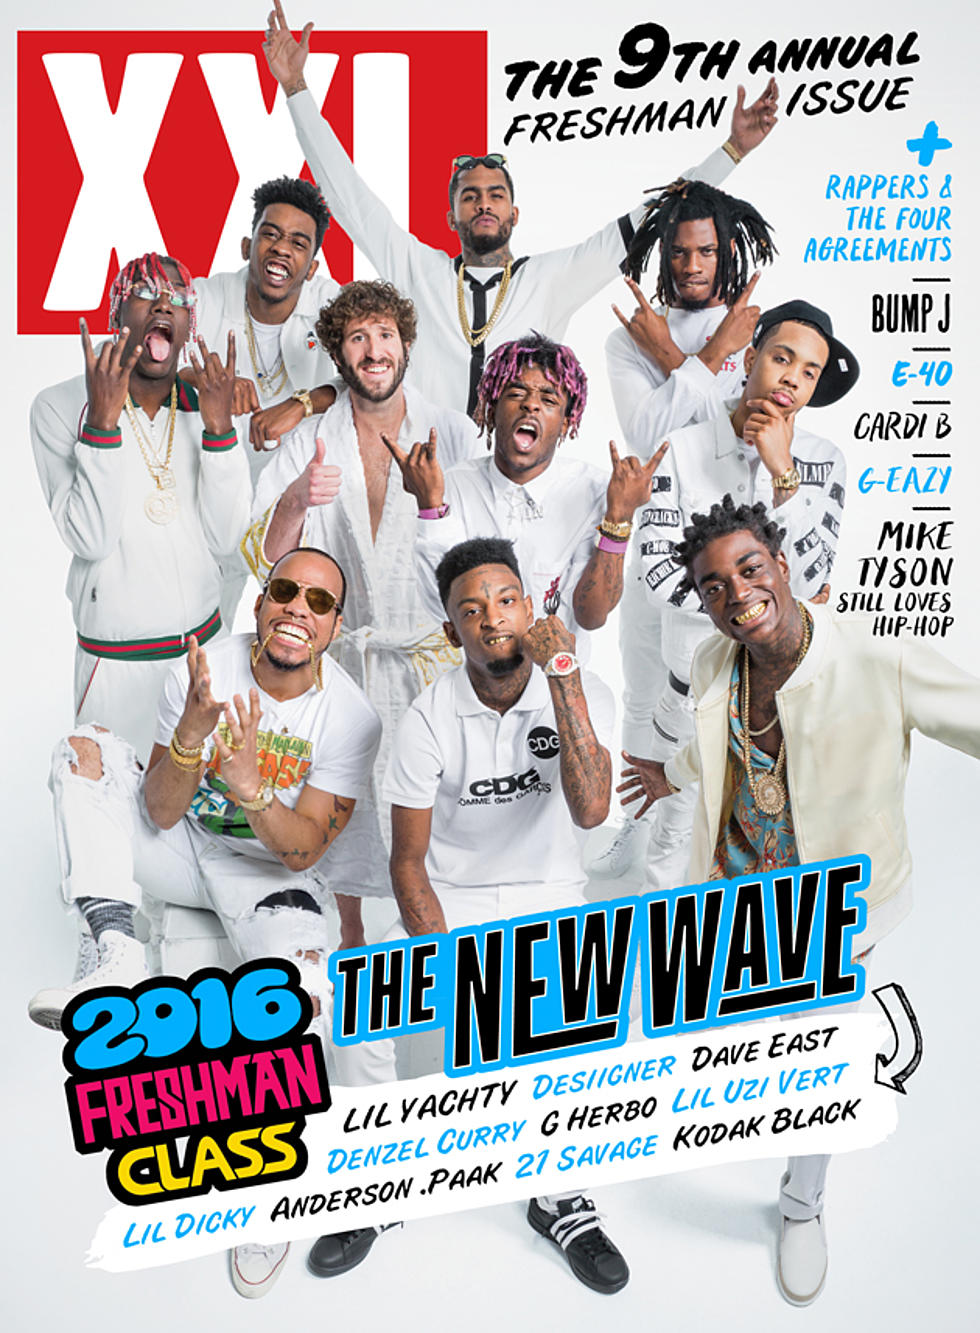 Anderson .Paak, Lil Dicky, Dave East and More React to Landing on the 2016 XXL Freshman Cover